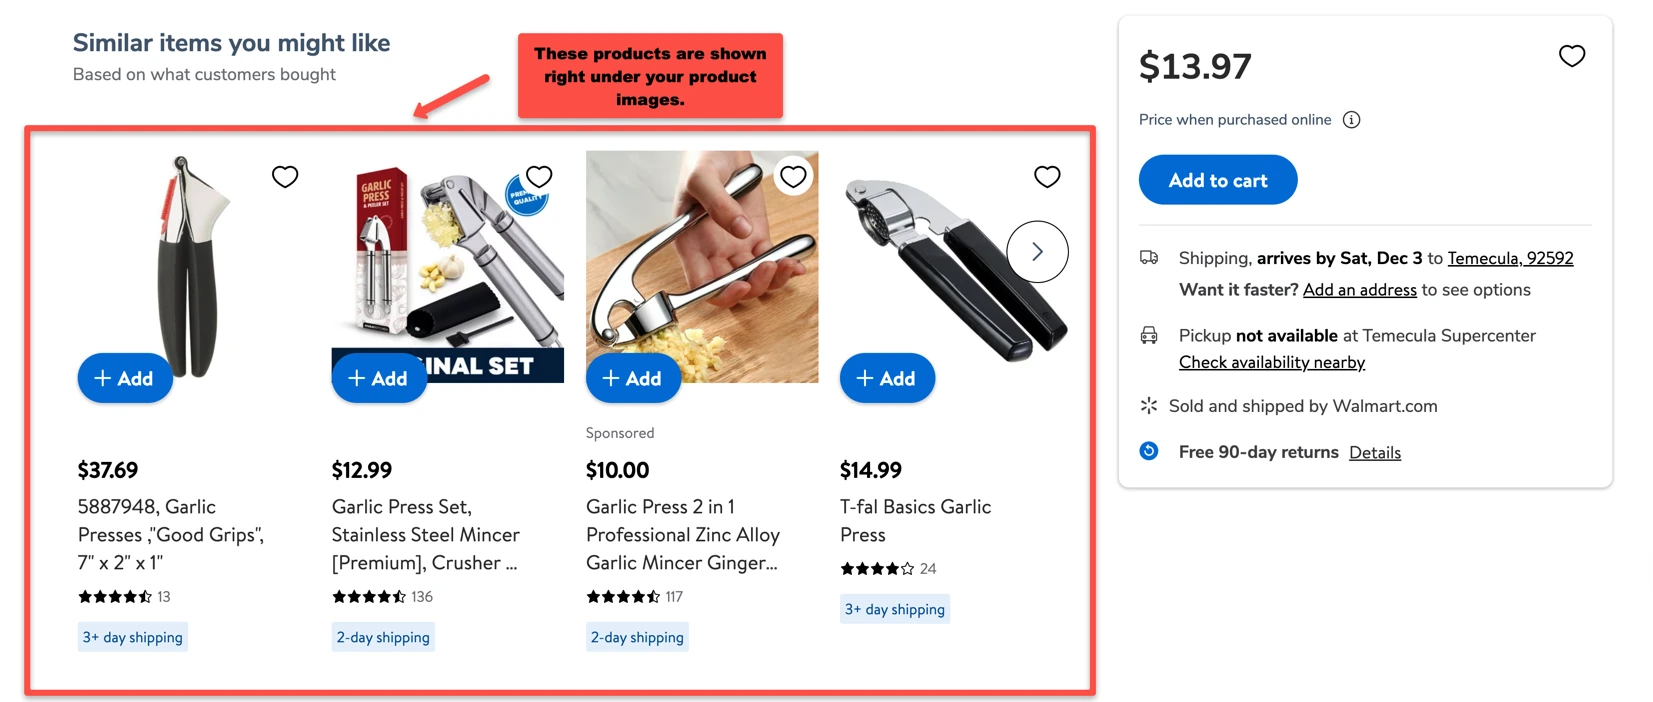 Similar items you might like search results for "garlic press"